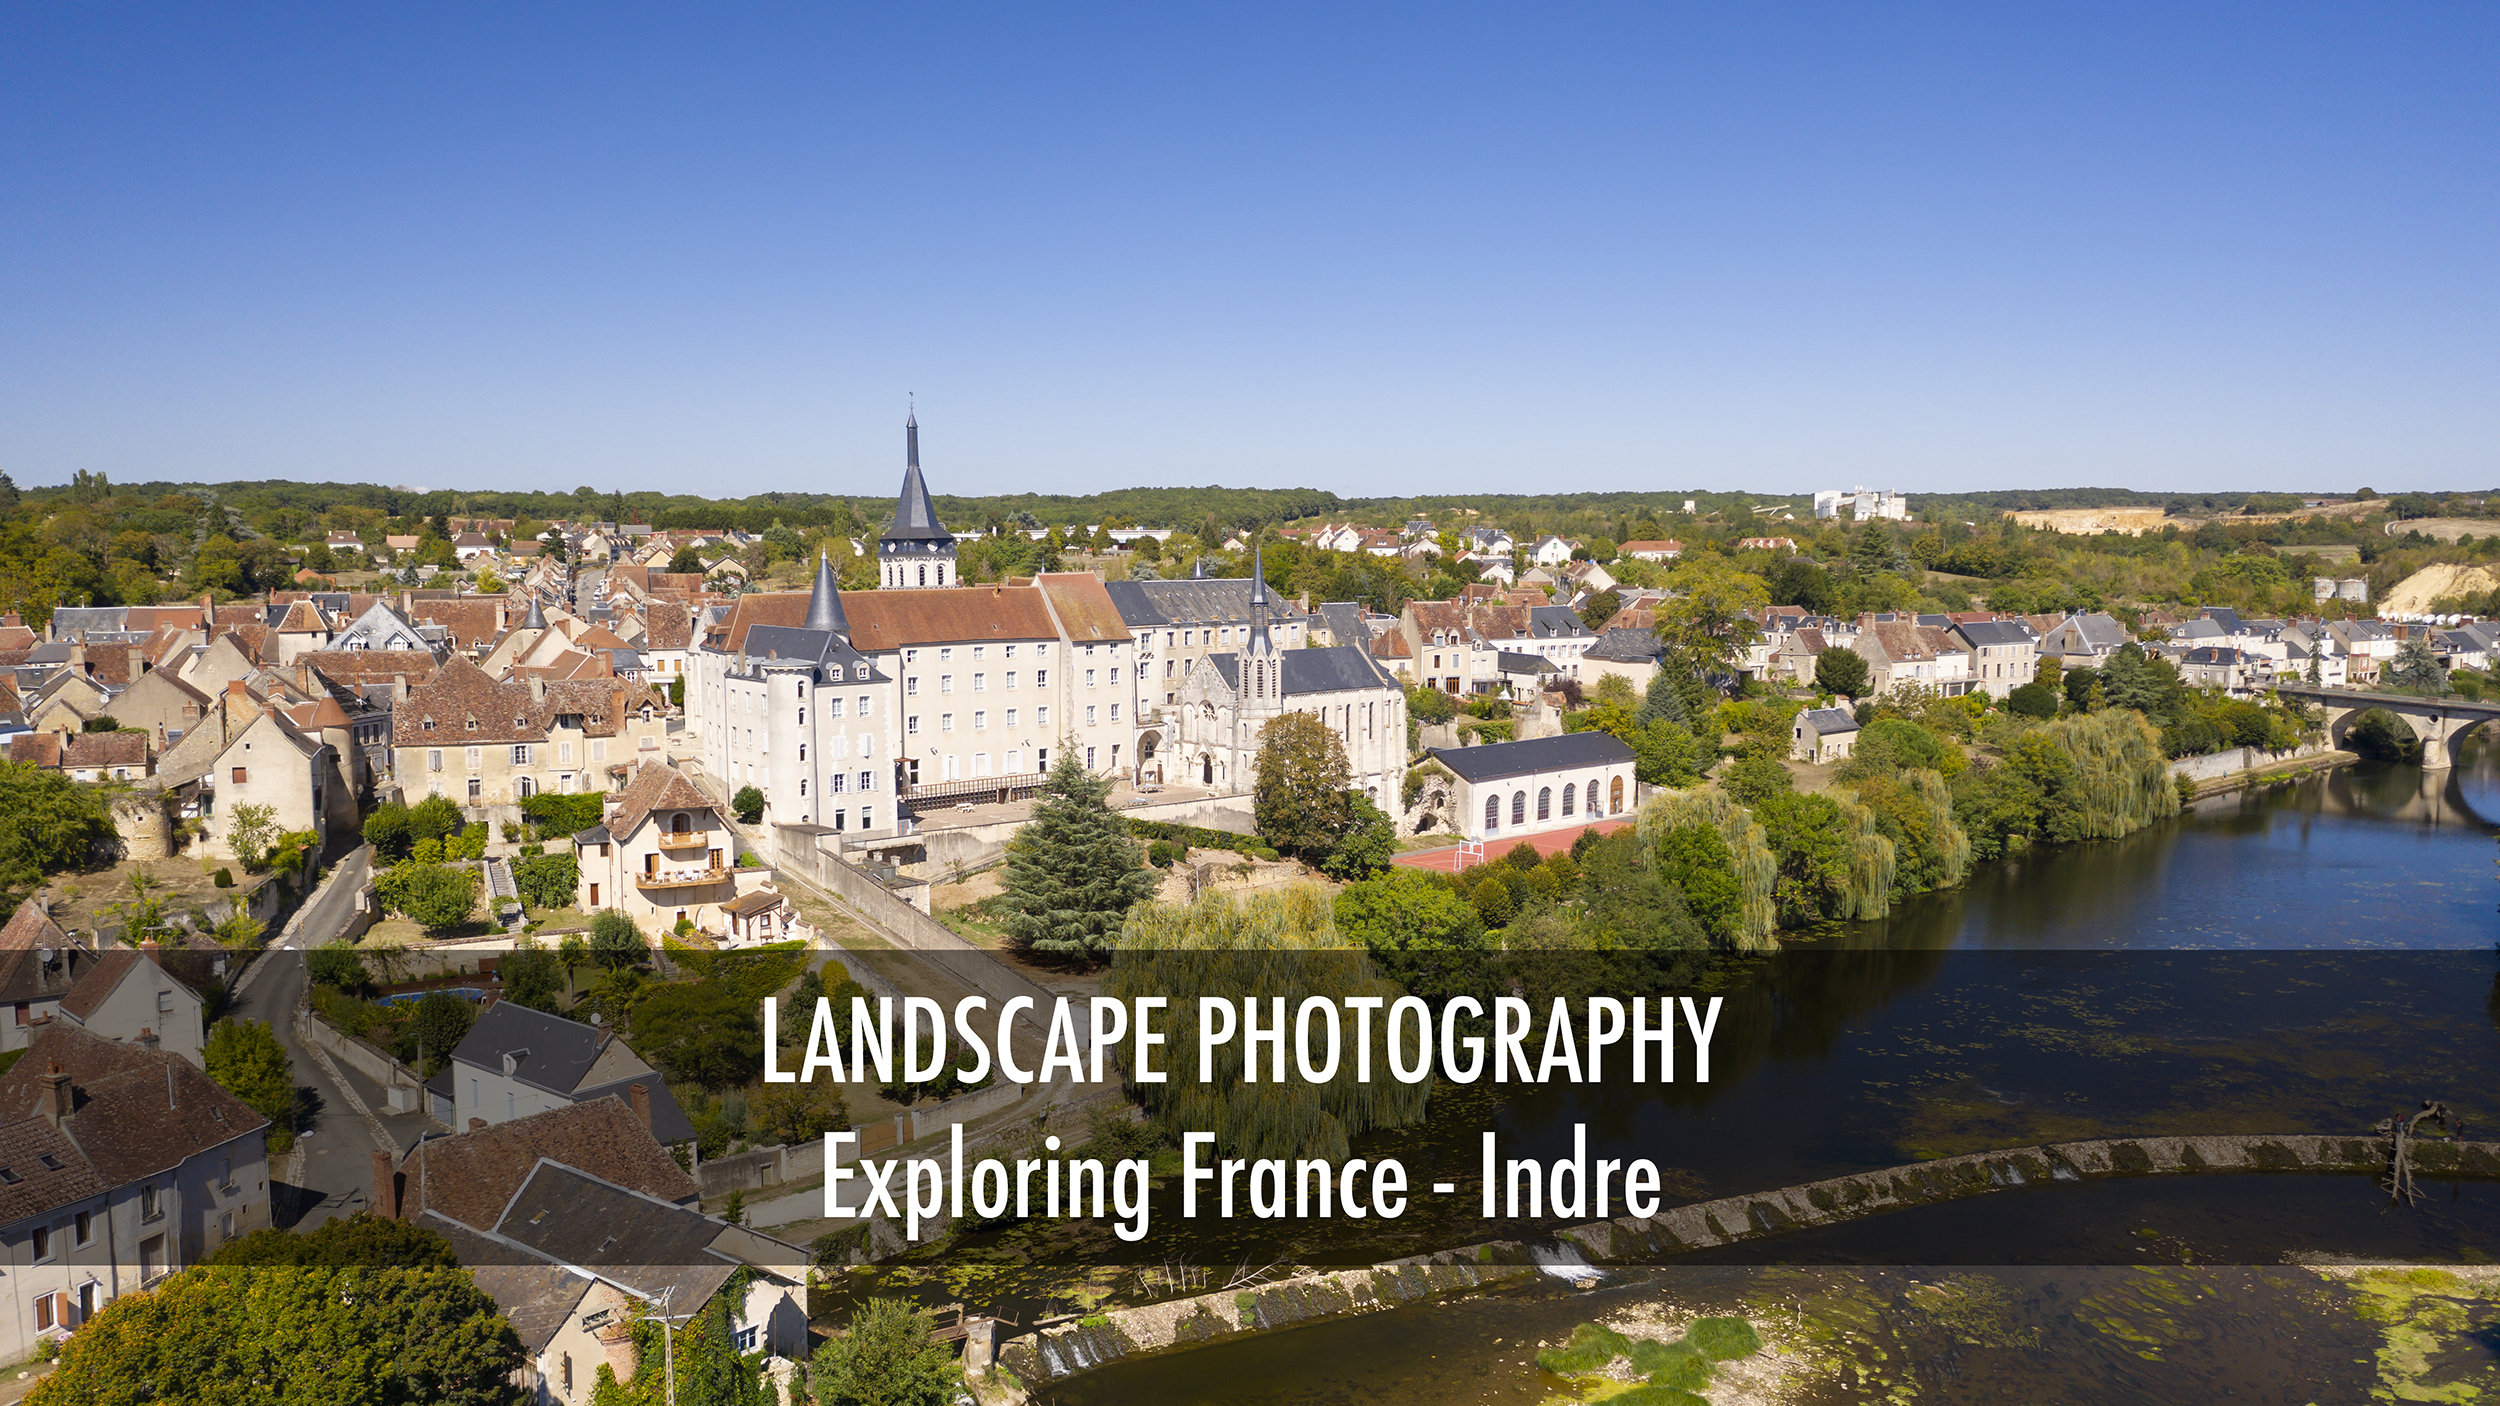 Exploring France. The department of Indre. Landscape photography.